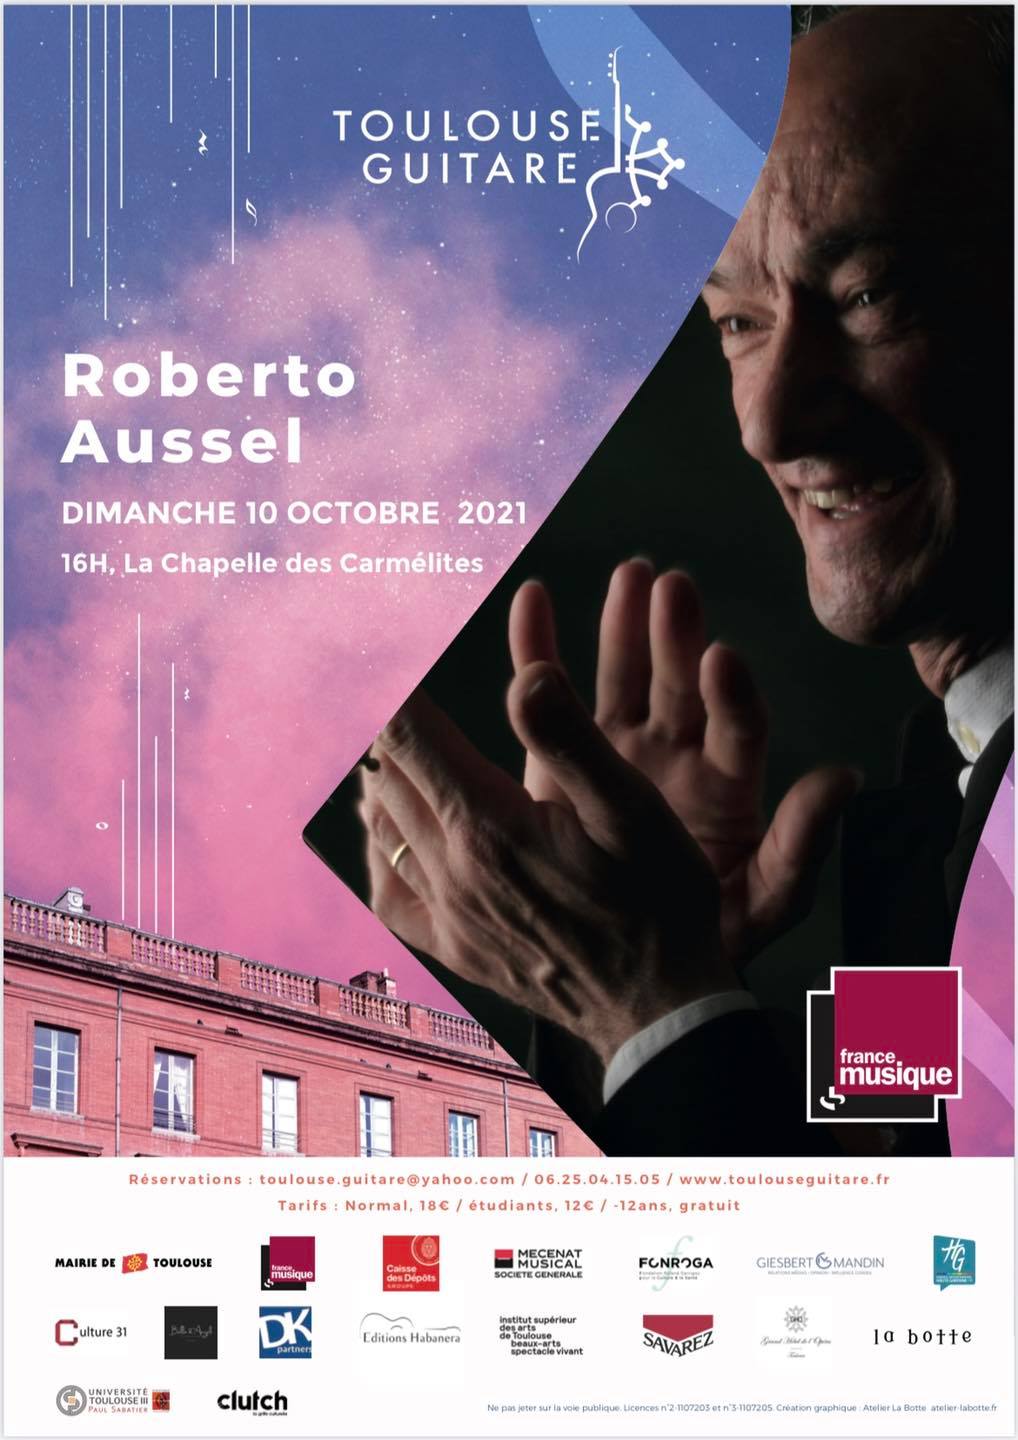 Roberto Aussel Toulouse Guitare